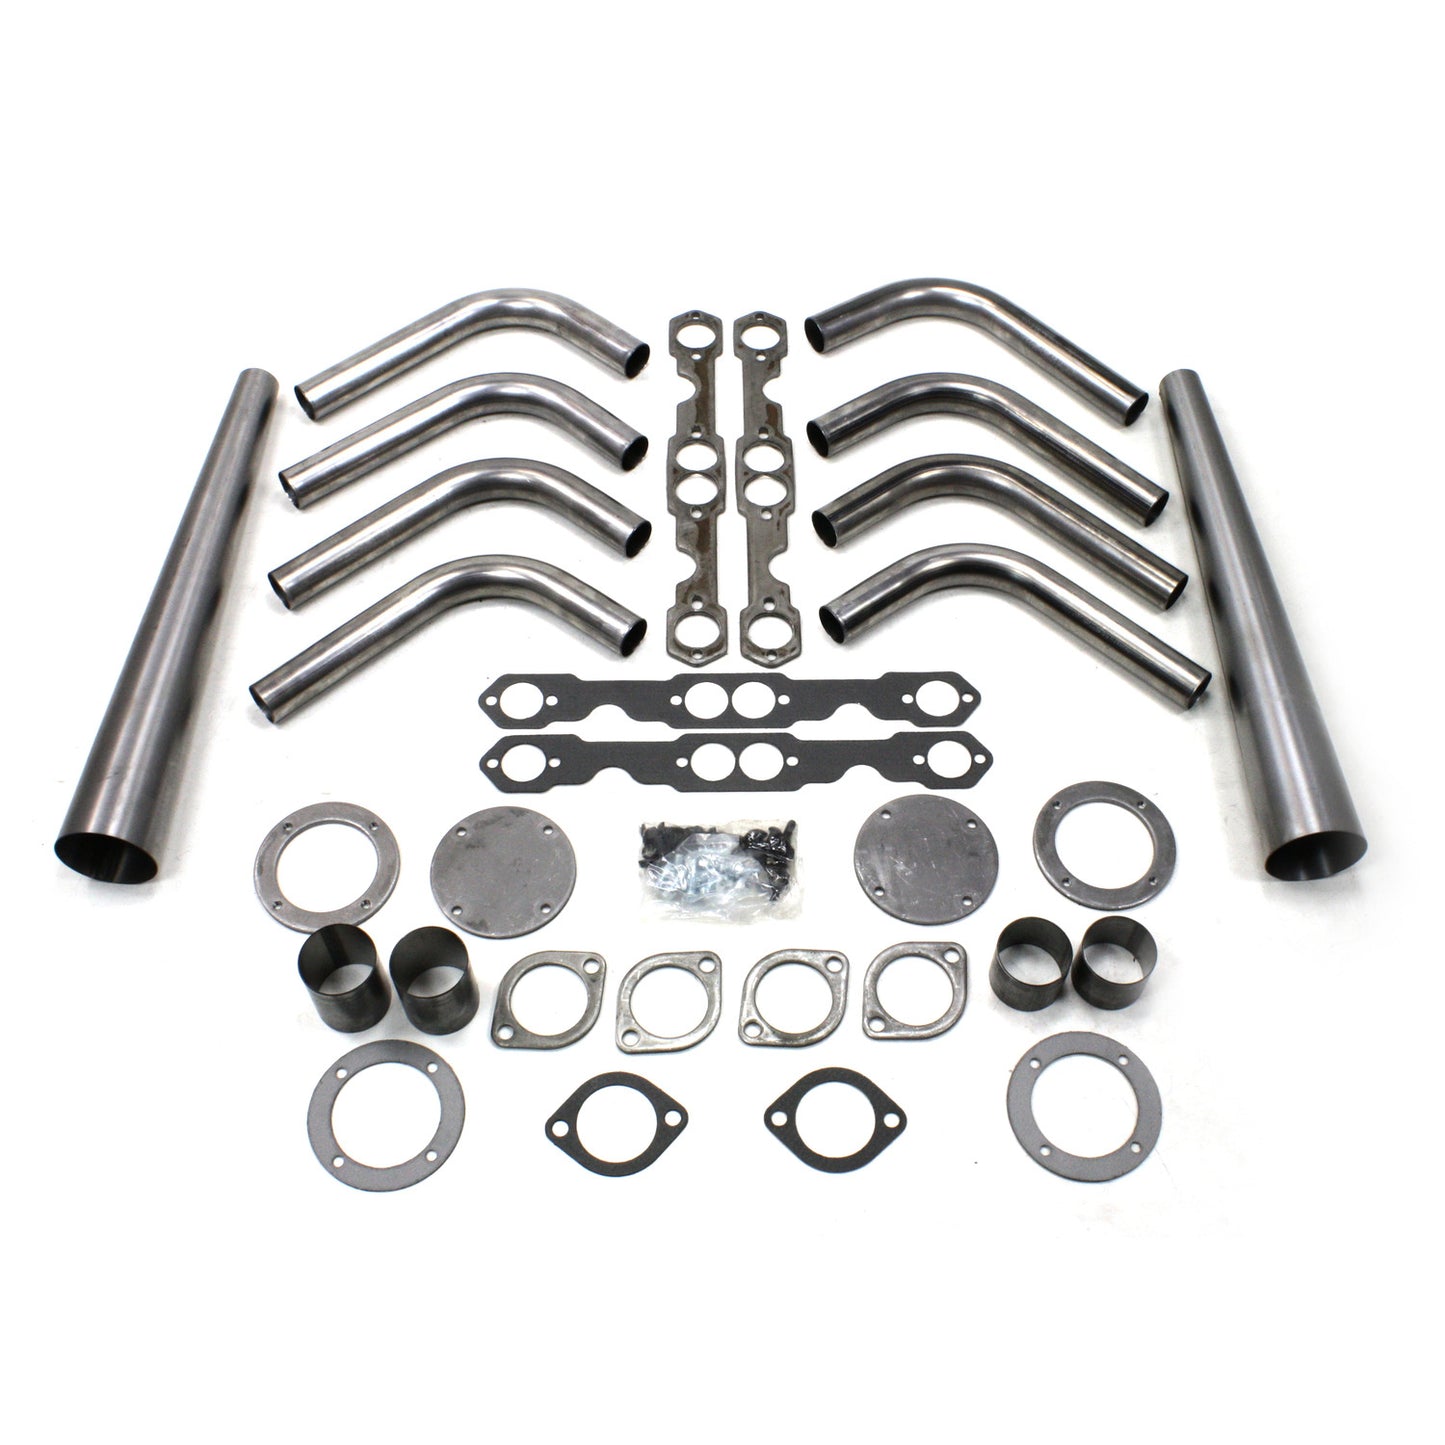 Patriot Exhaust H8001 1 5/8"x3 1/2" Header Lakester Weld-up Kit Small Block Chevy